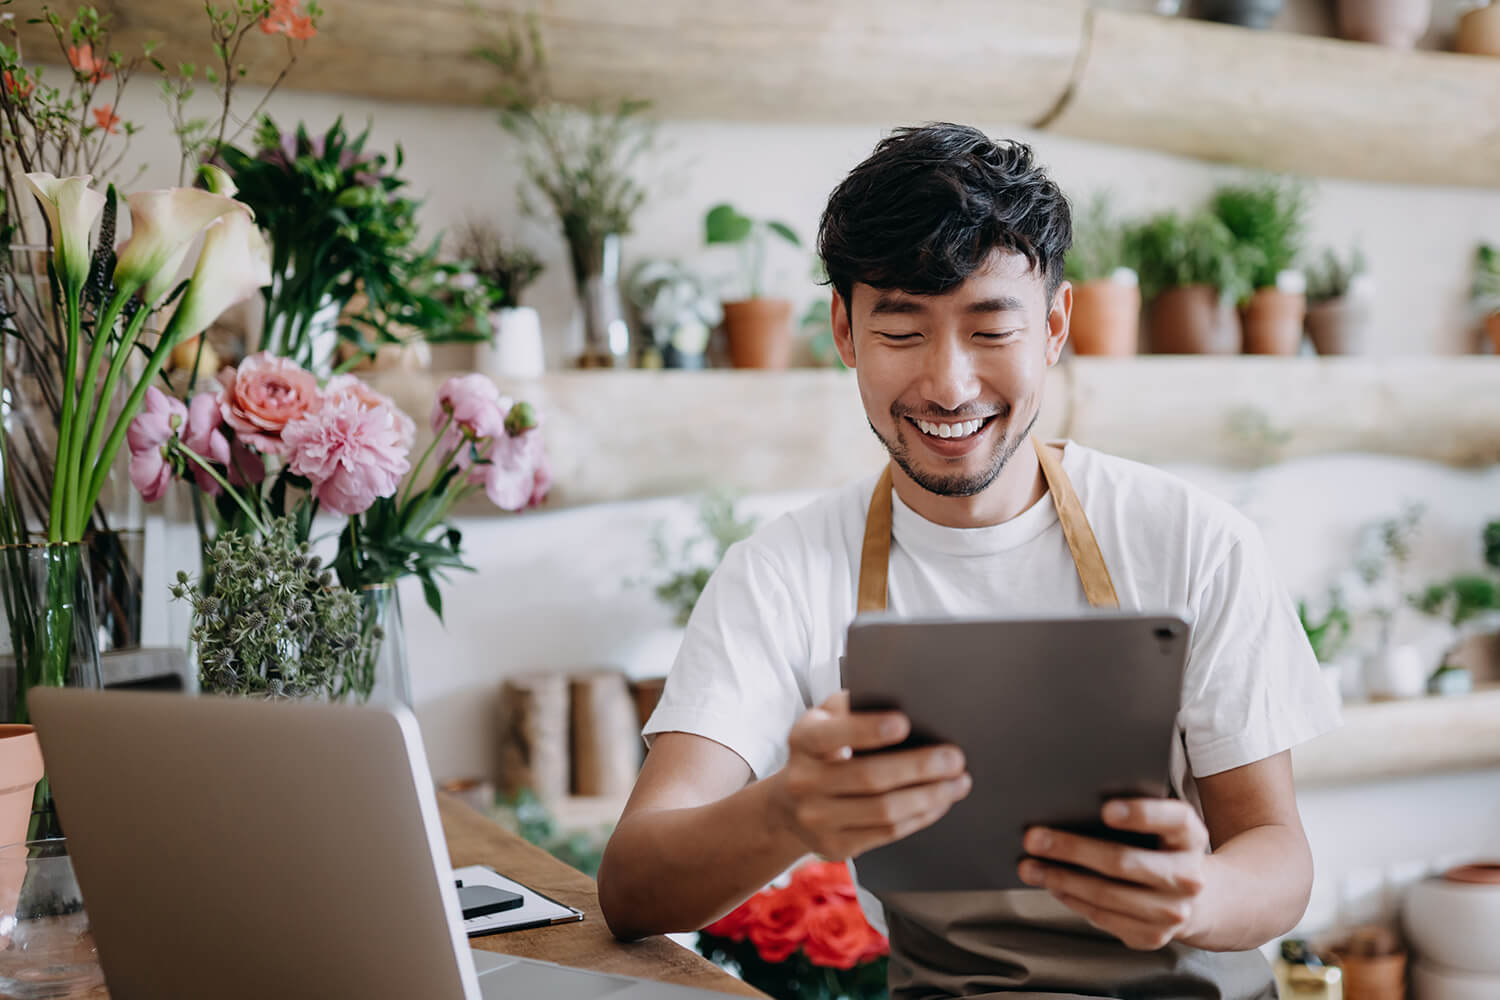 Smiling Asian male florist looks at tablet